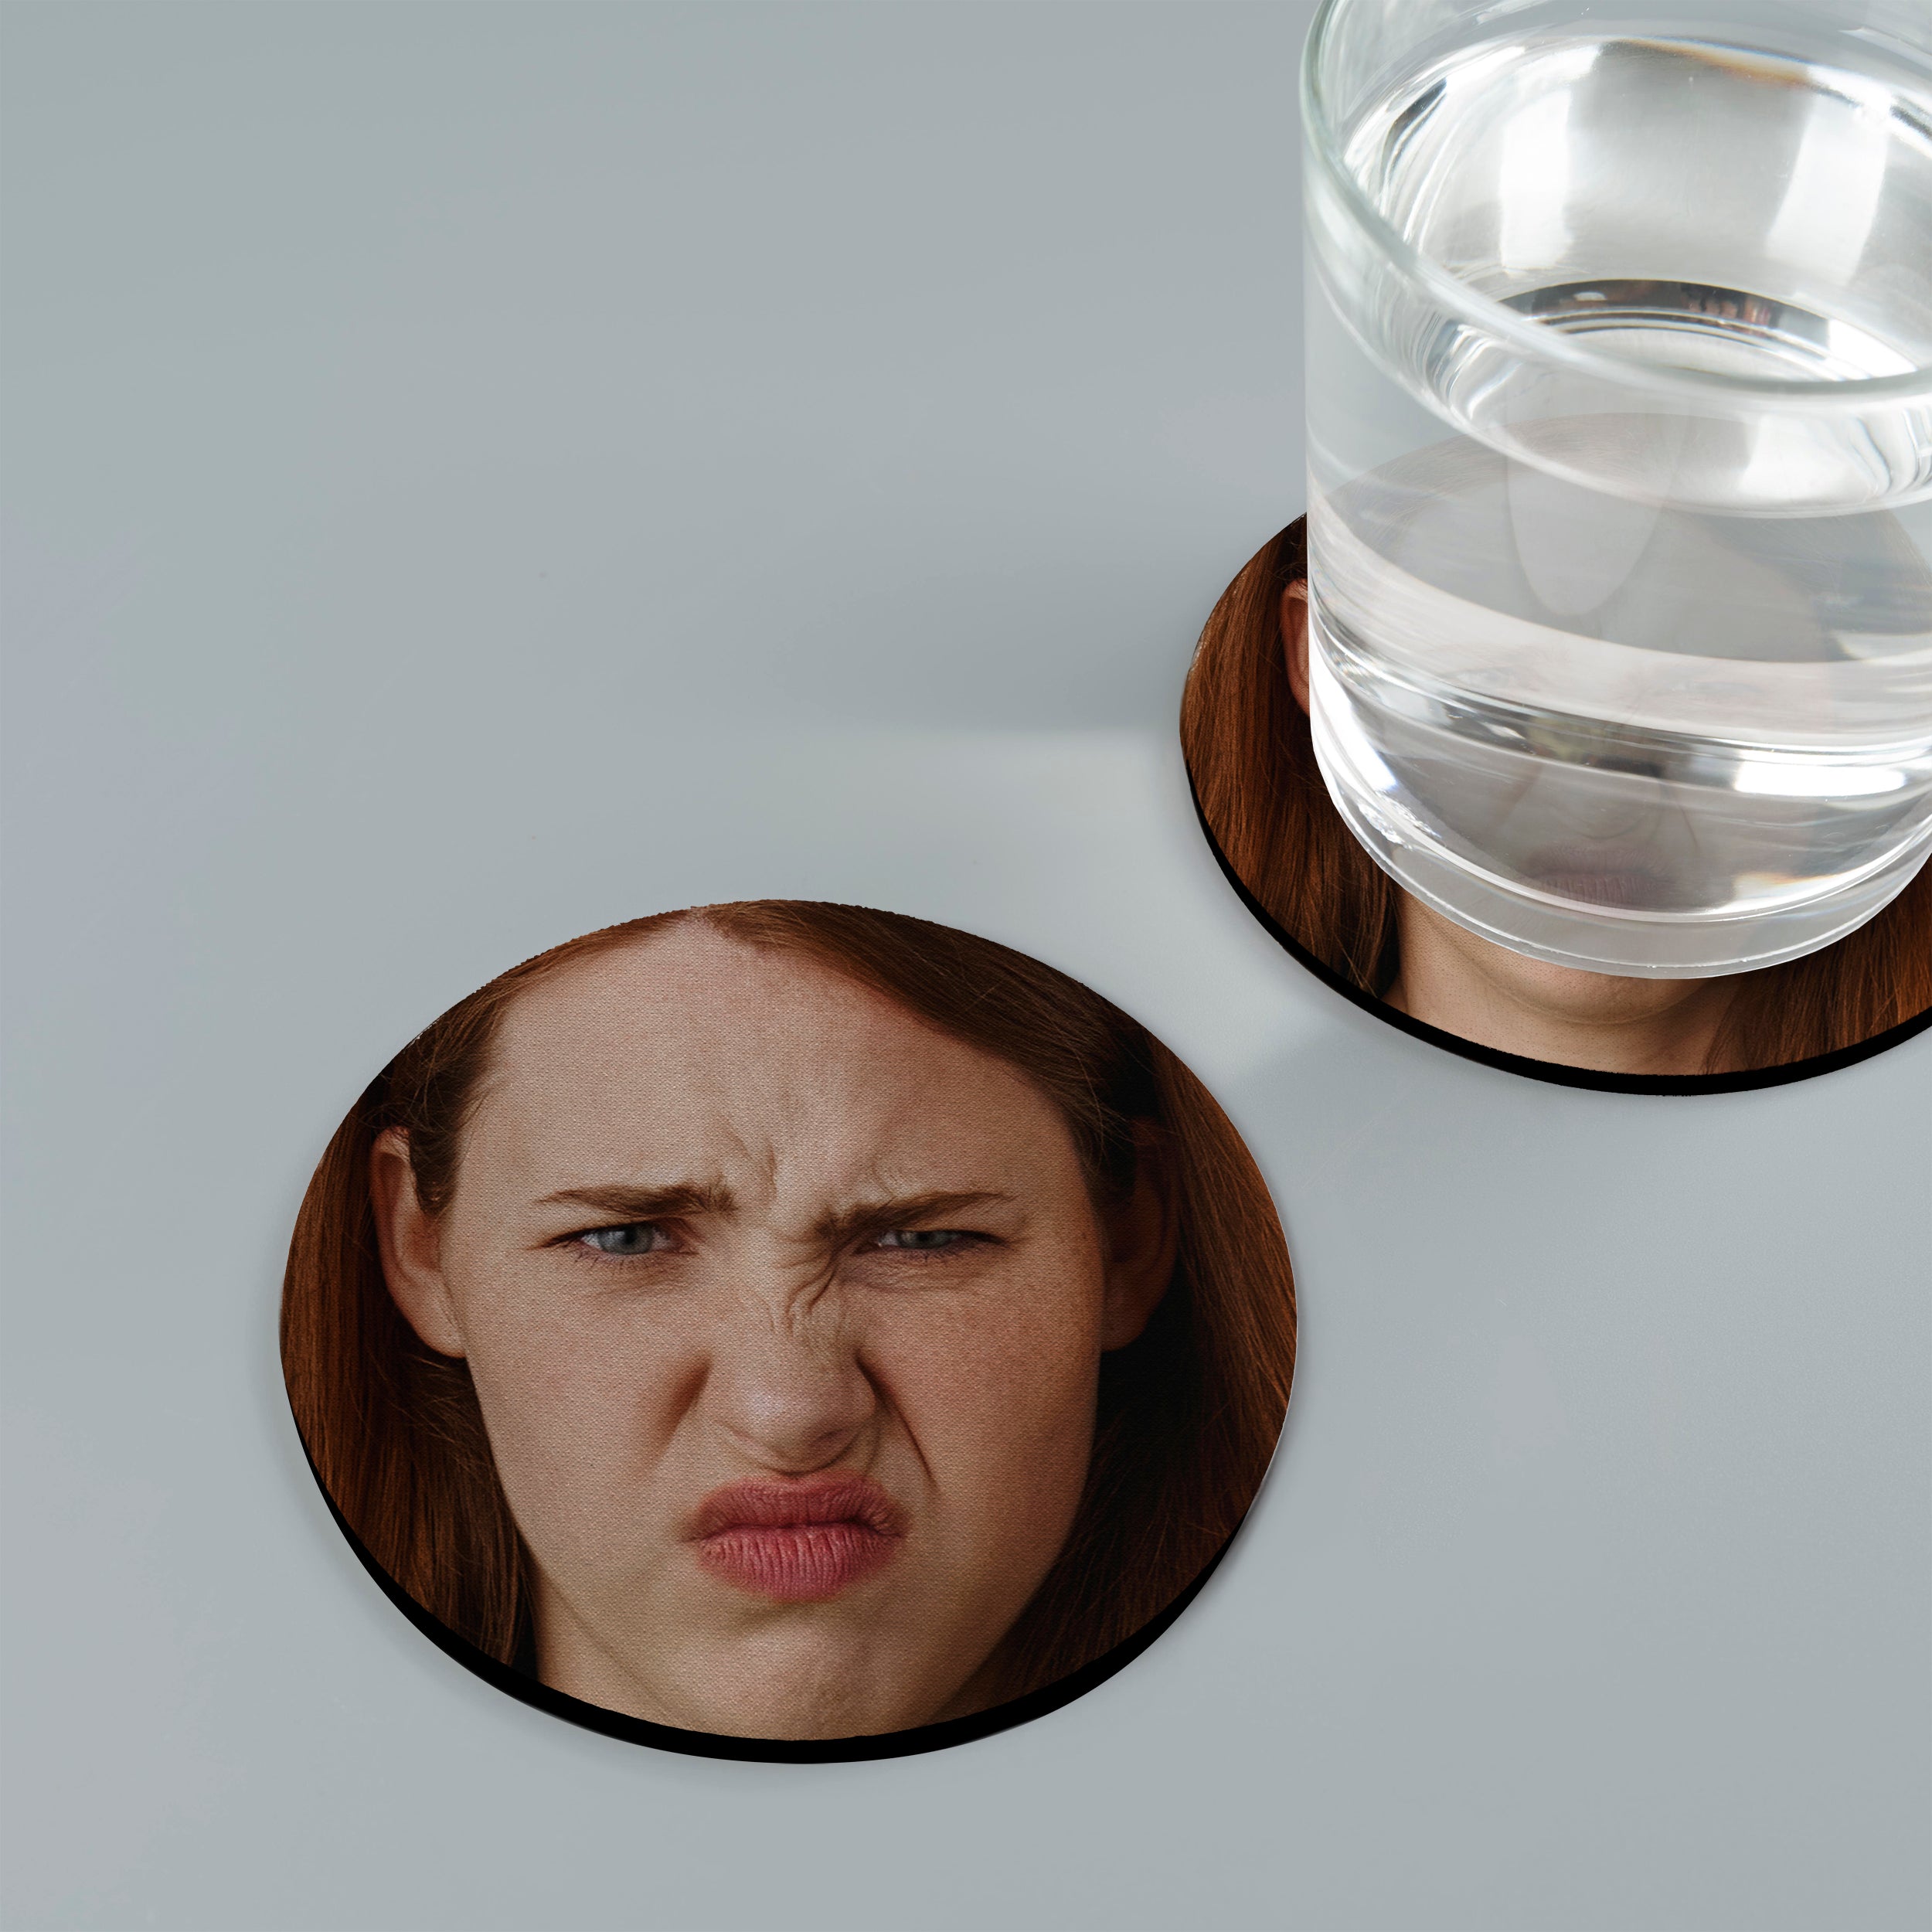 Your Face - Personalised Drinks Coaster - Round or Square